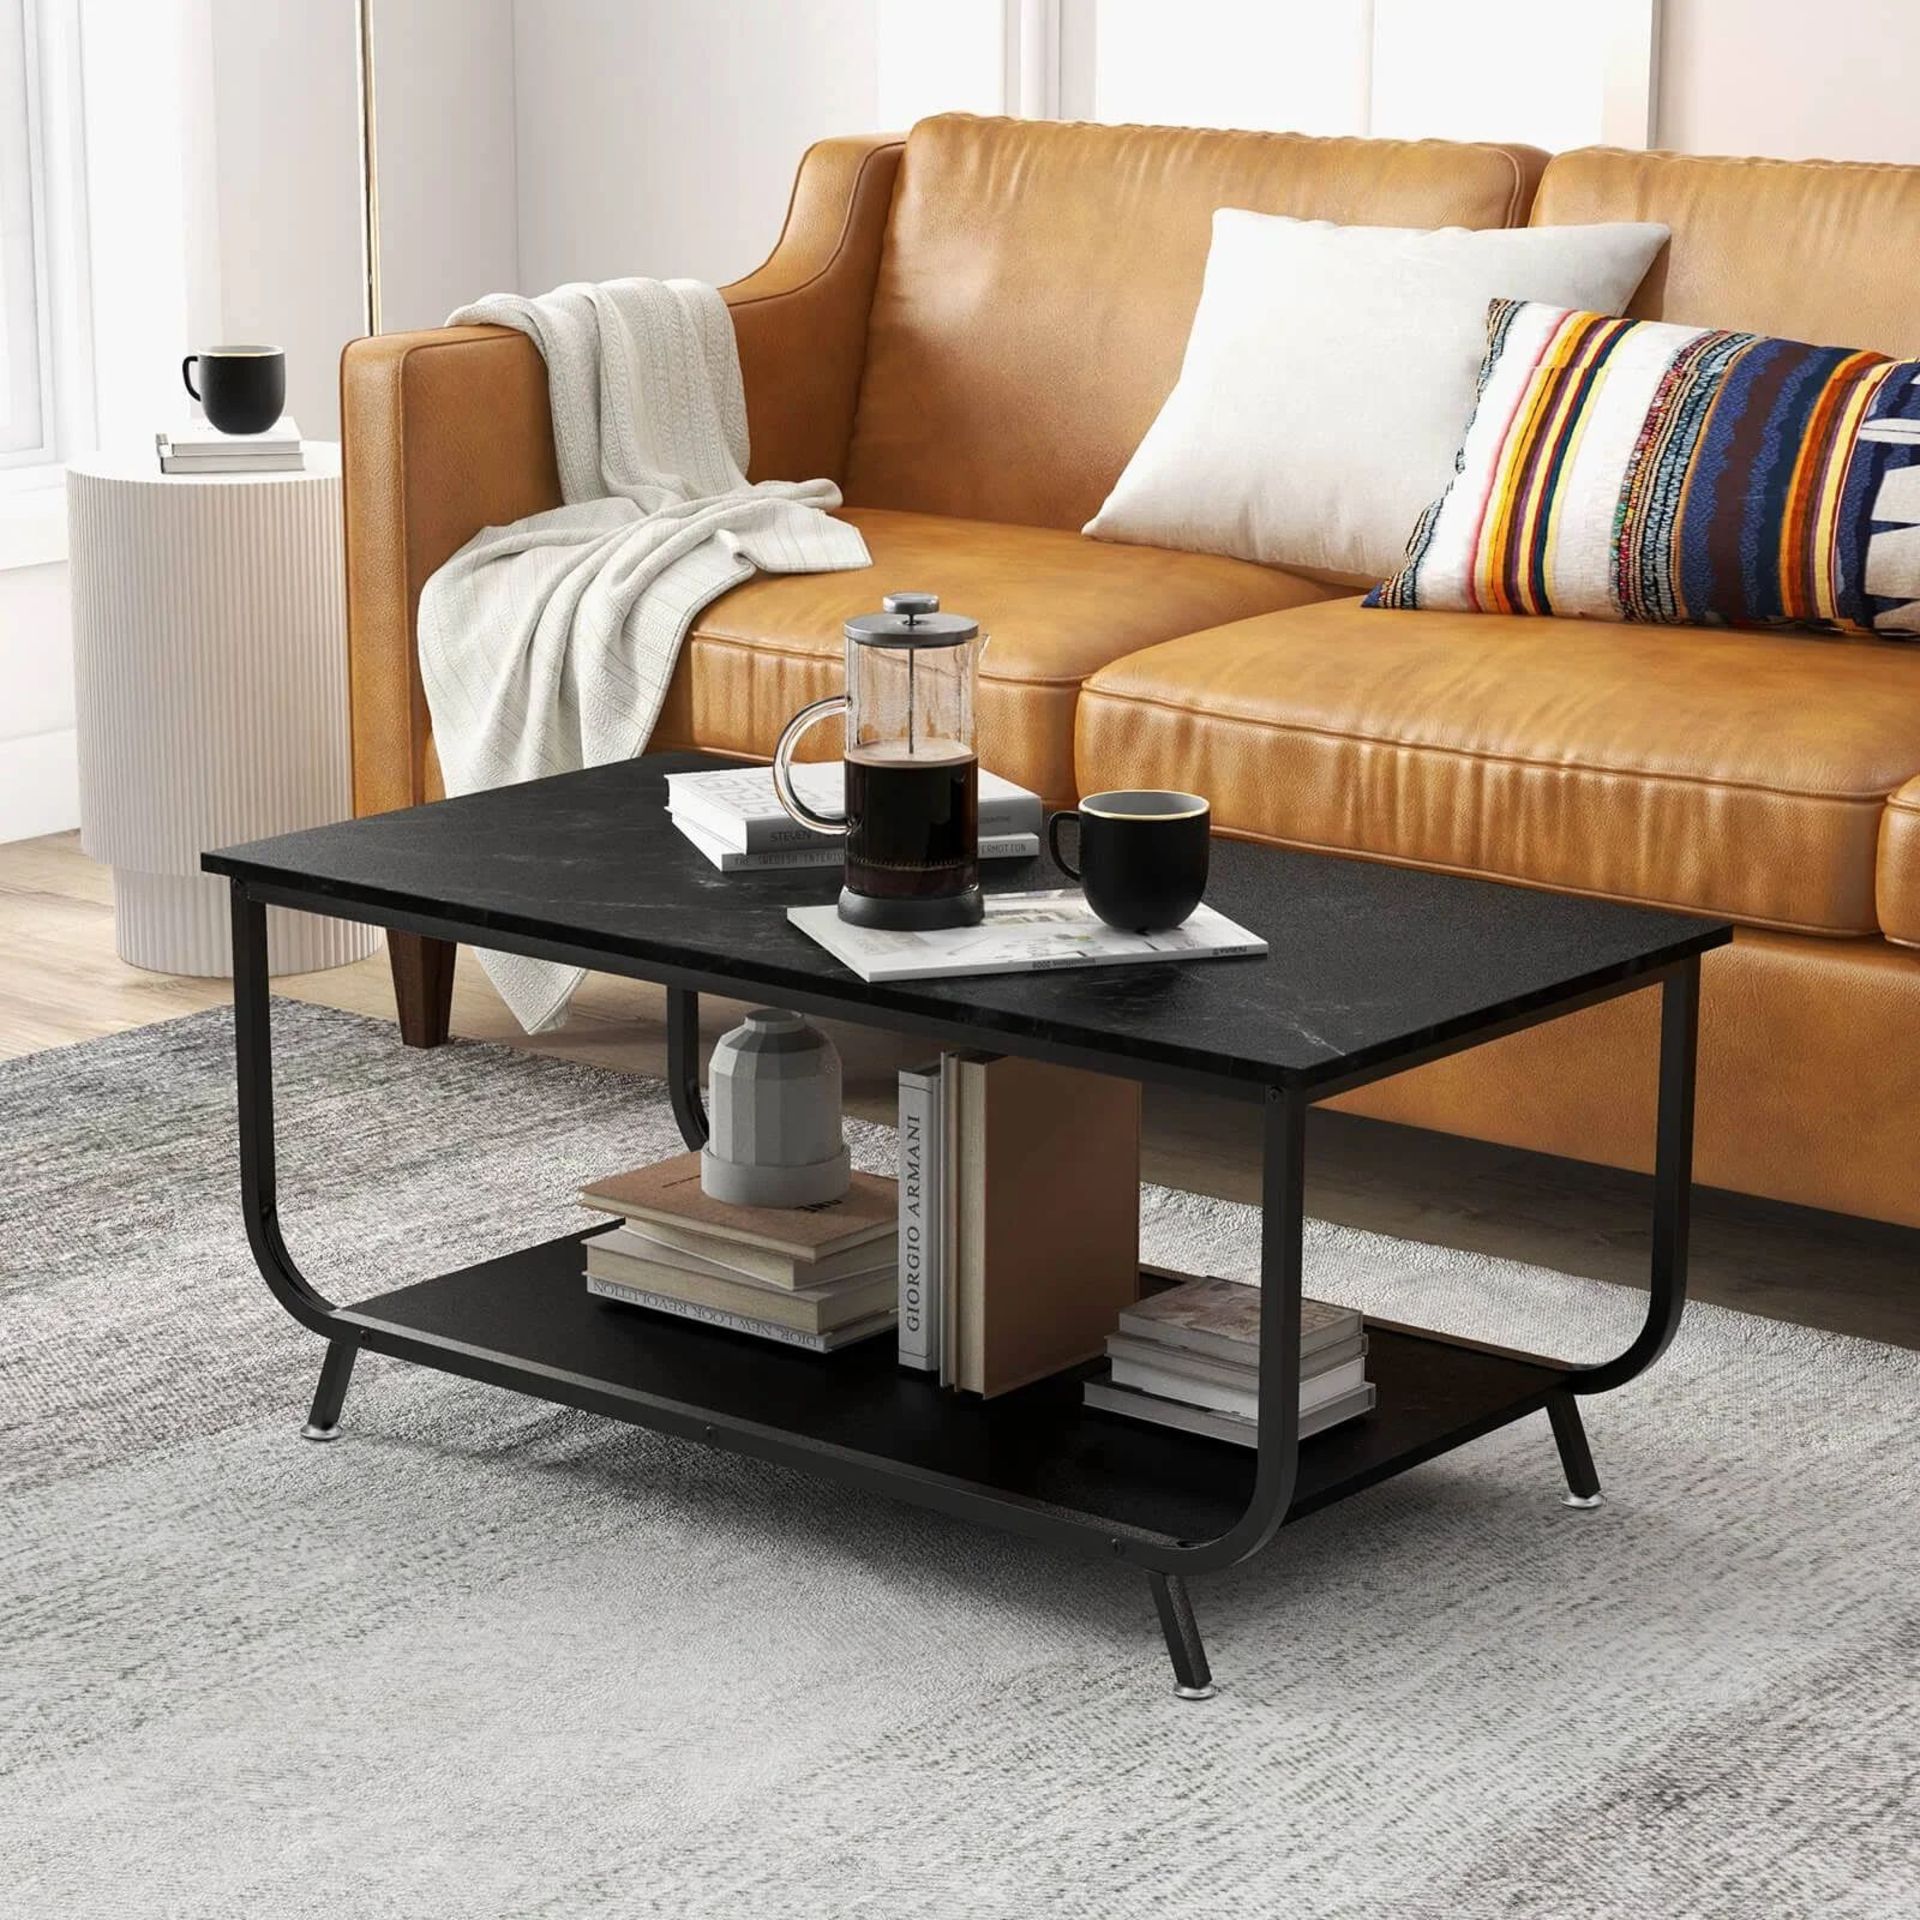 Store 2-Tier Faux Marble Coffee Table Rectangular with Shelf-Black. - ER53.